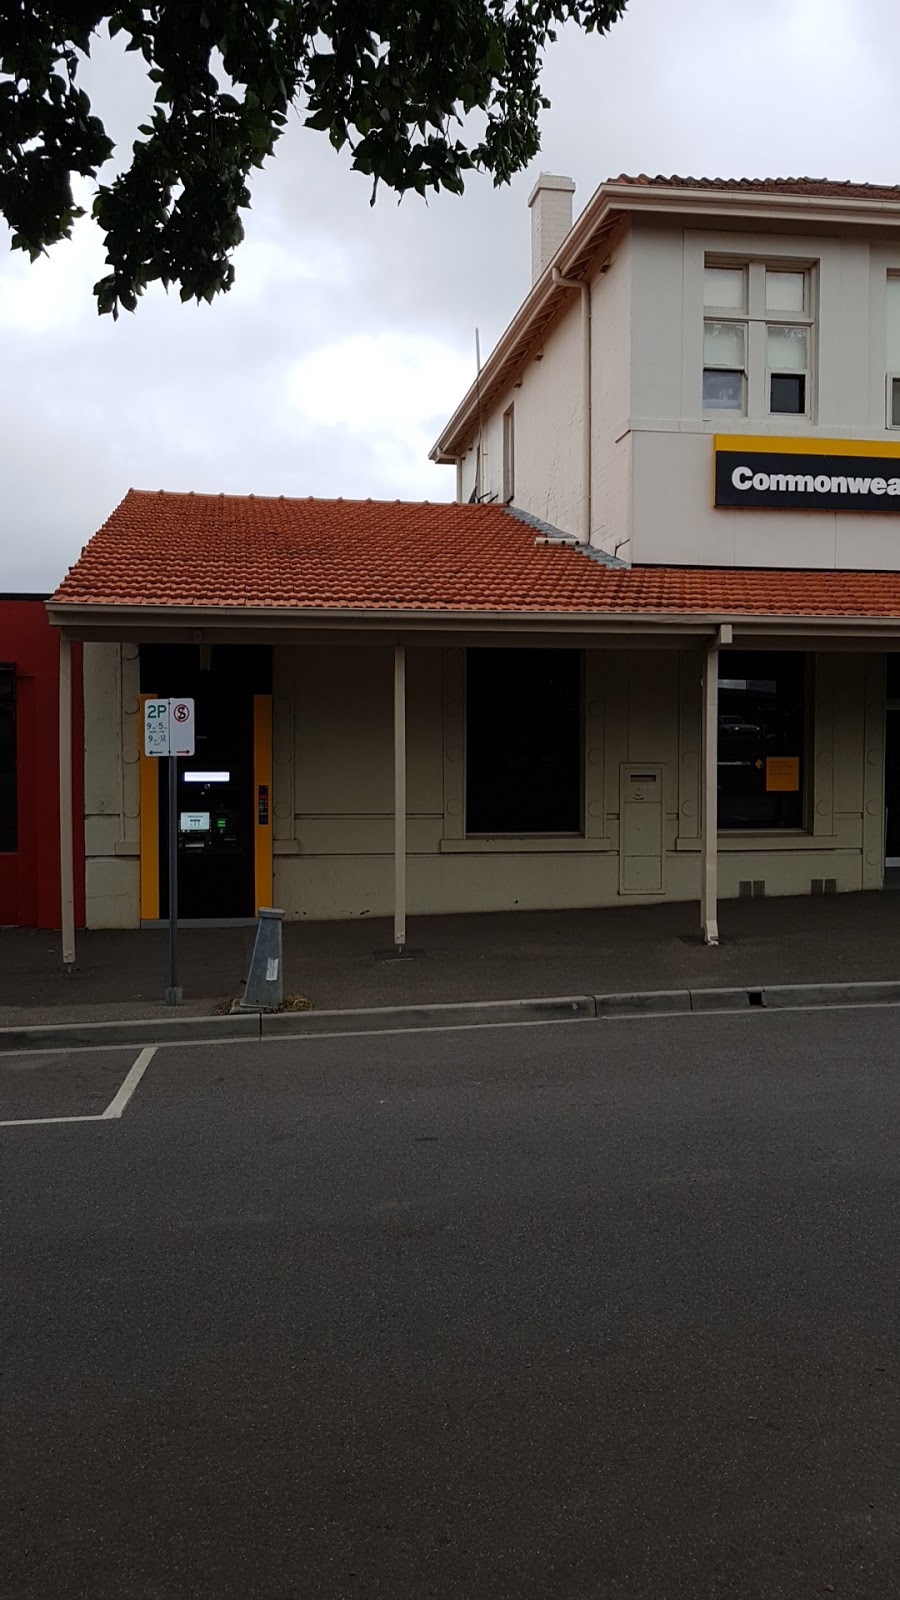 CBA ATM (Branch) | bank | High St & Urquhart St, Woodend VIC 3442, Australia | 132221 OR +61 132221